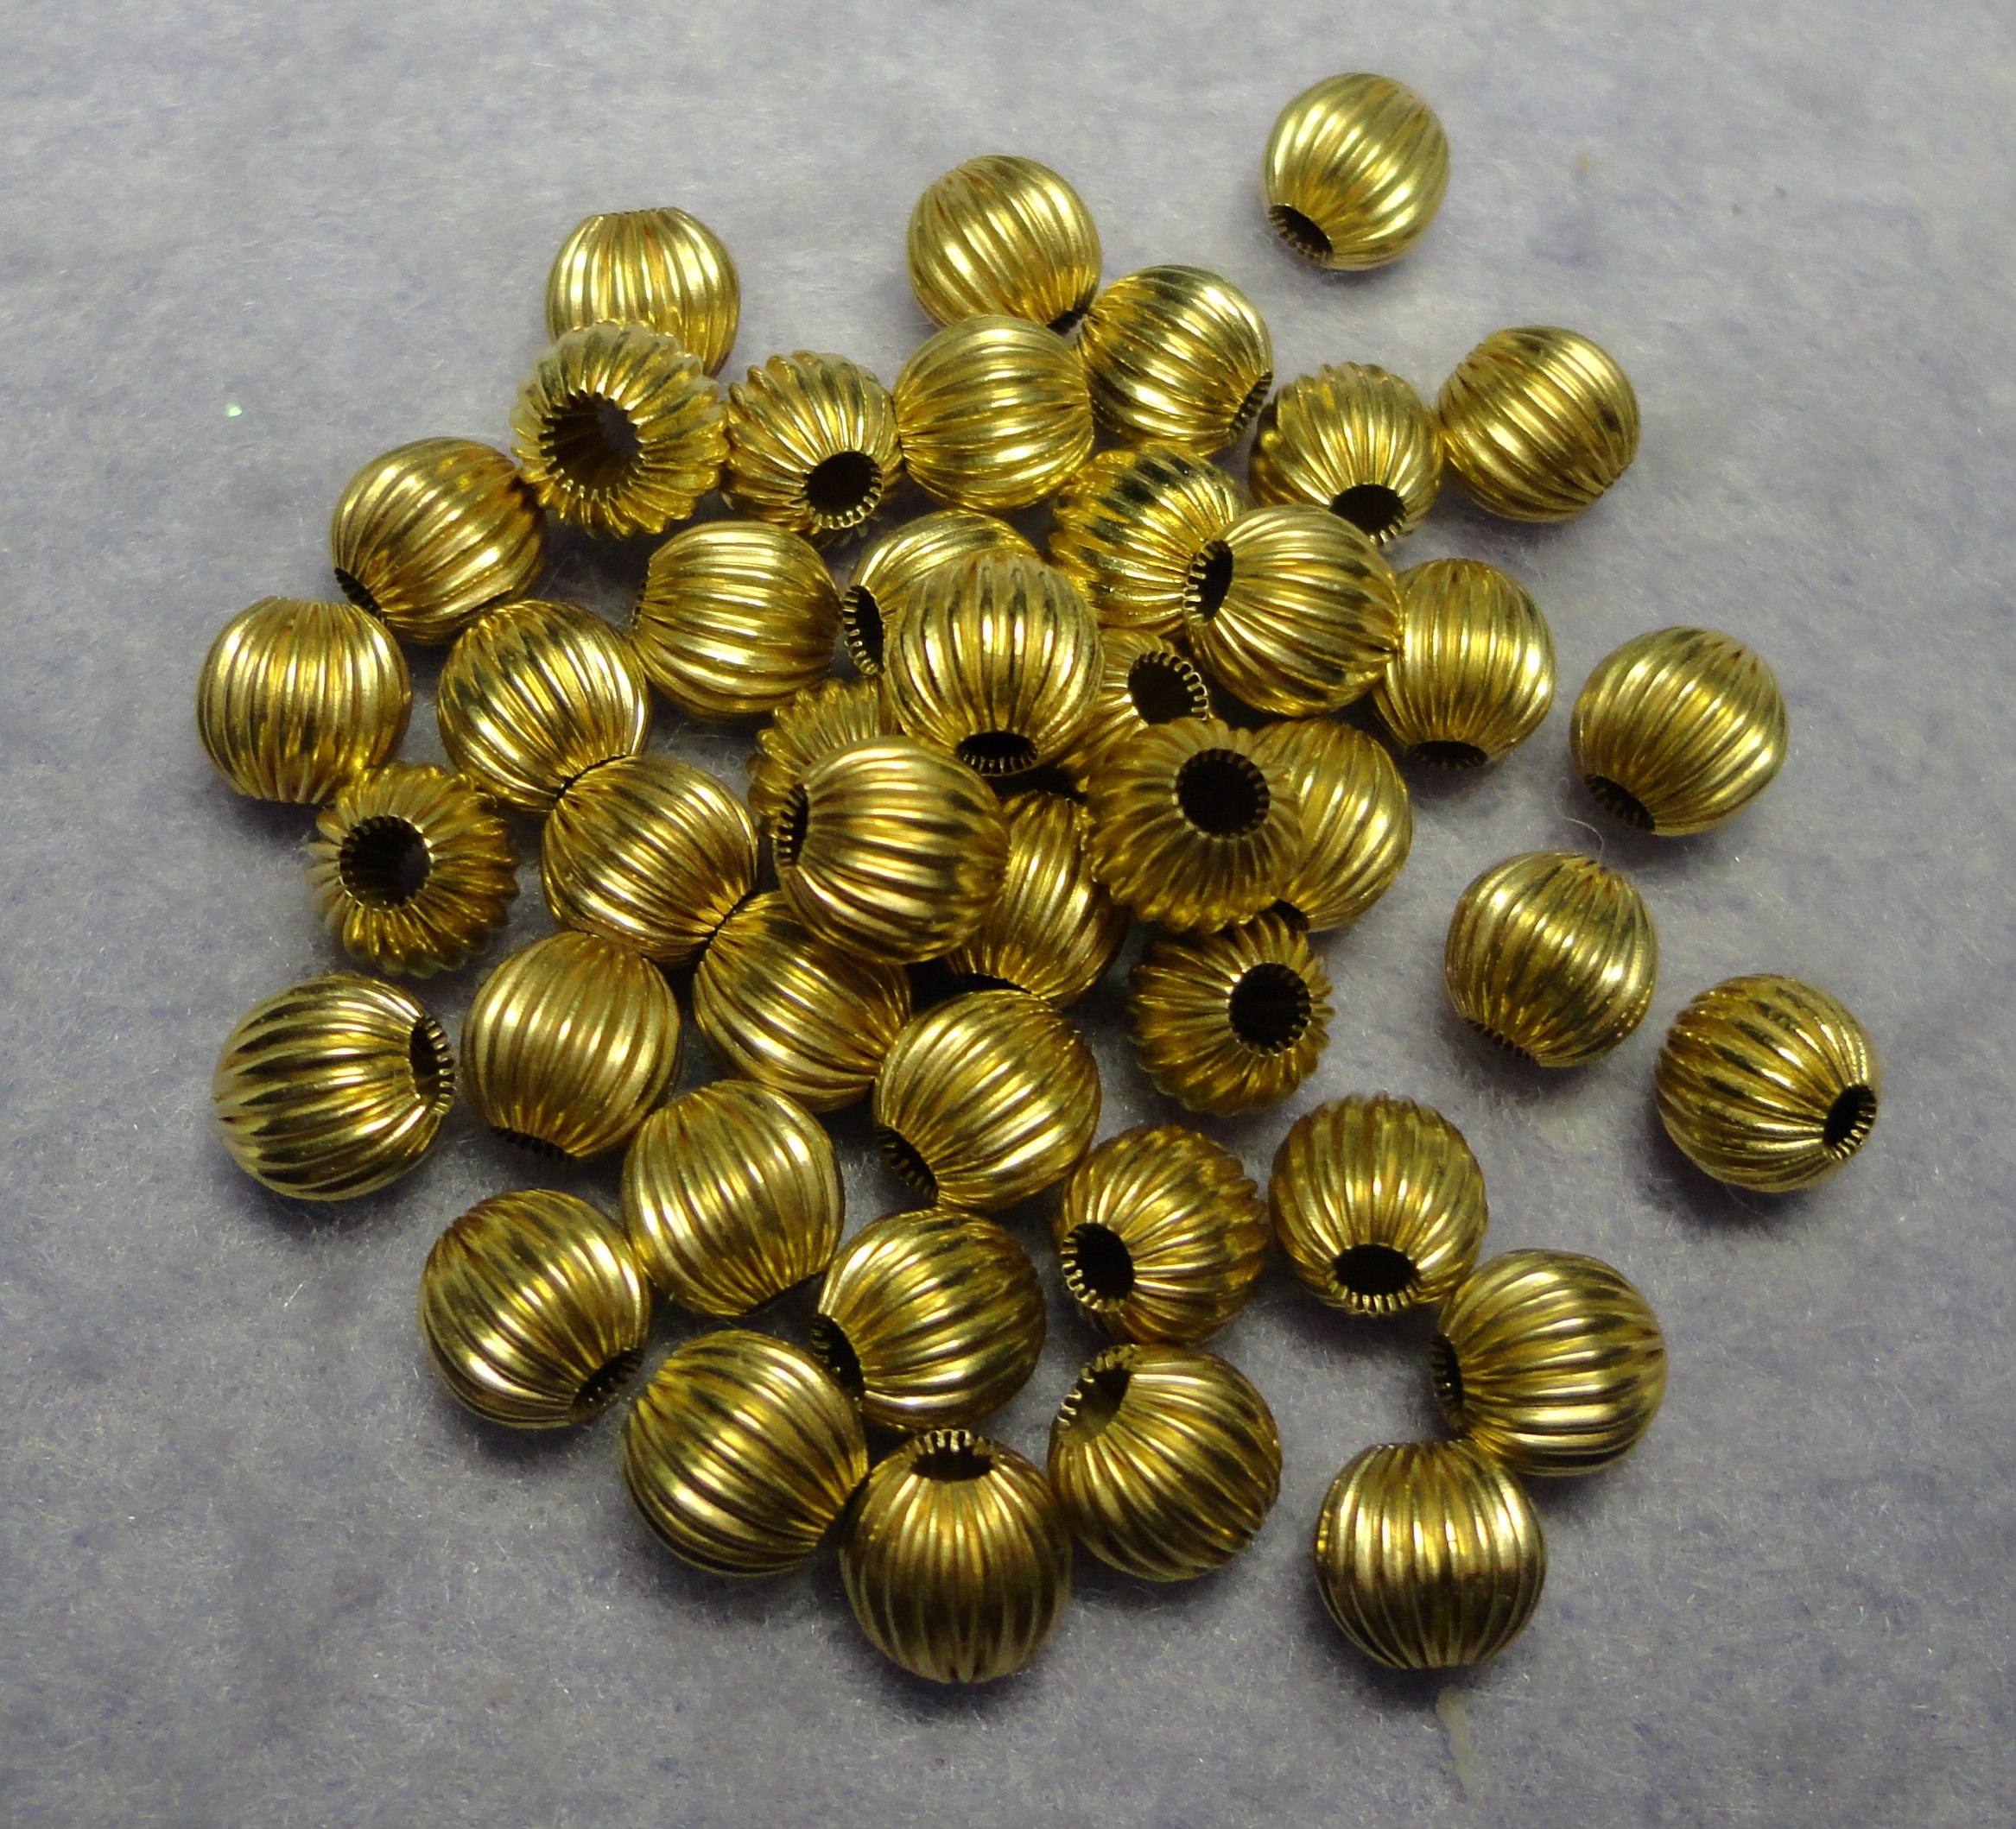 14 KT SOLID GOLD BEADS CORRUGATED 5MM 6 PCS